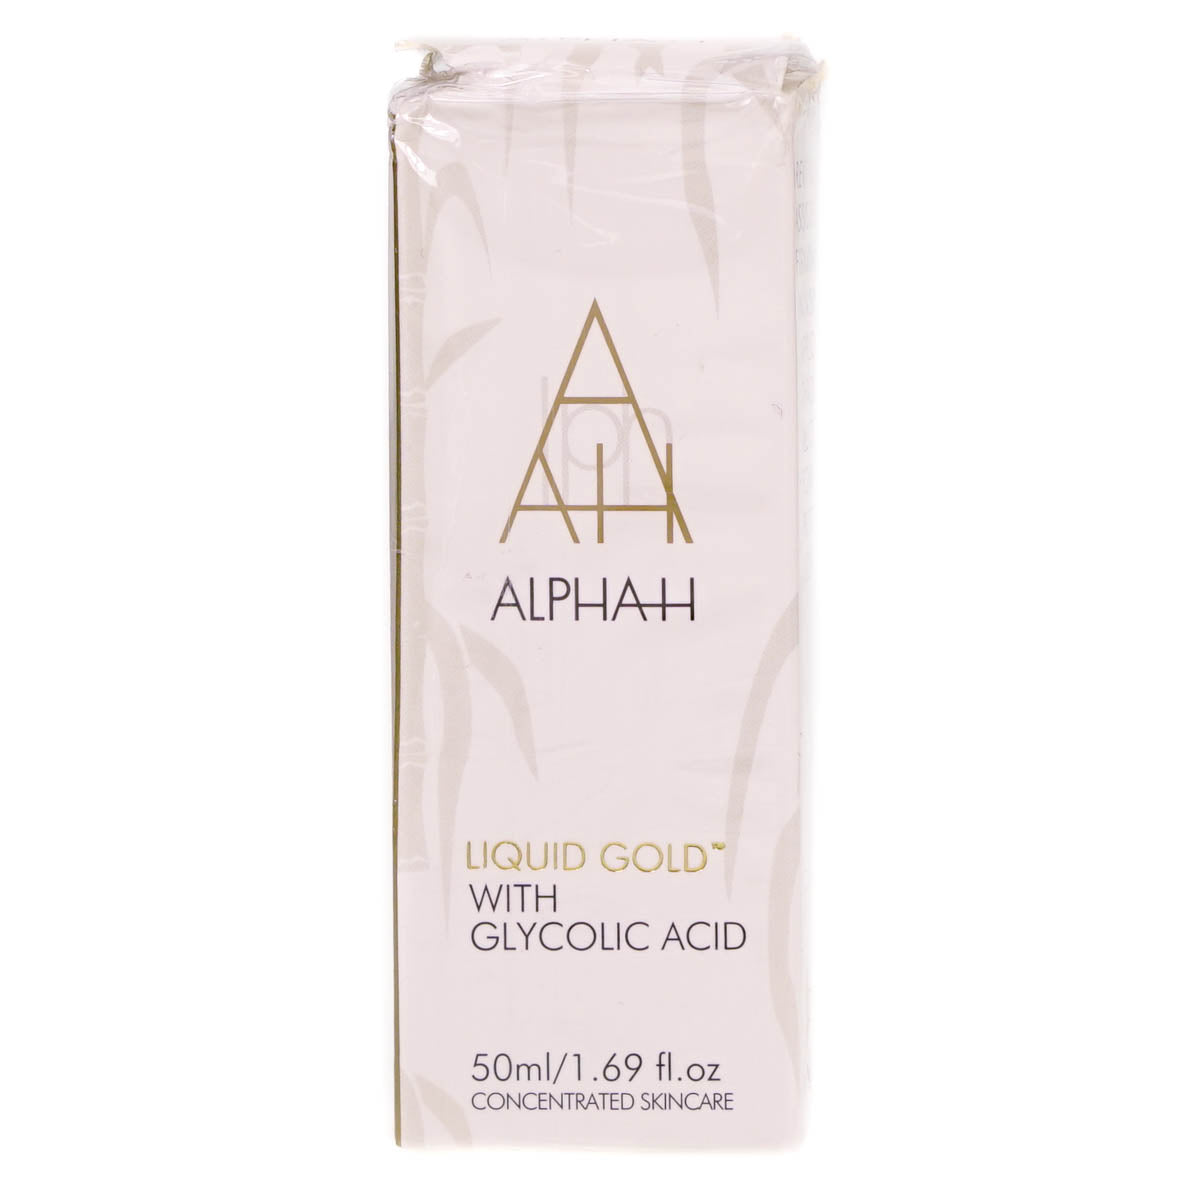 Alpha-H Liquid Gold 50ml Firming Face Serum With Glycolic Acid (Blemished Box)